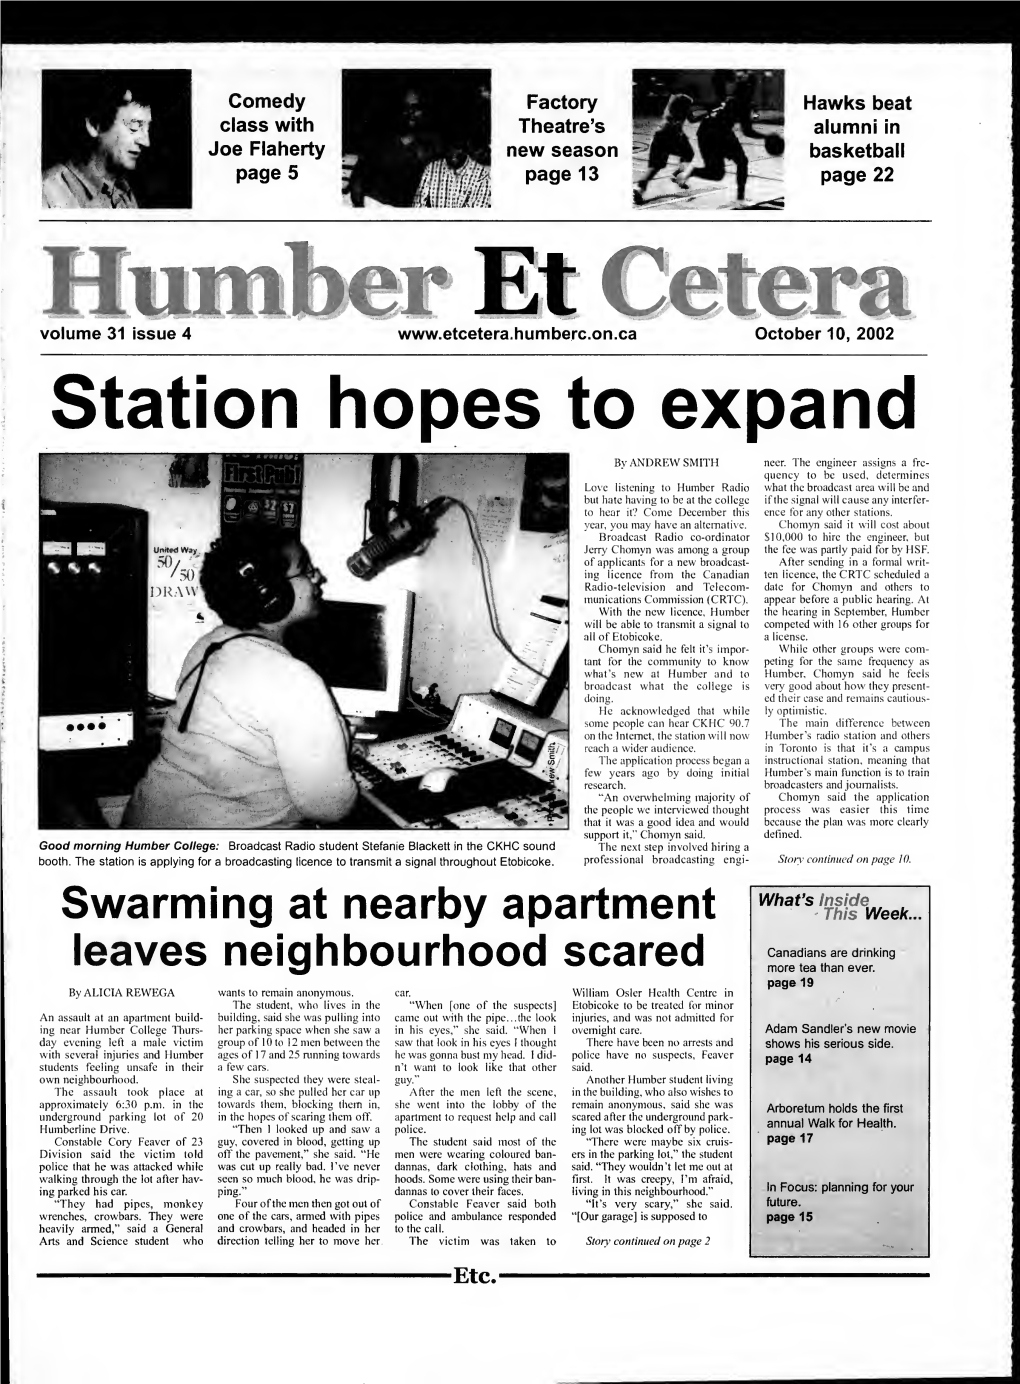 Station Hopes to Expand